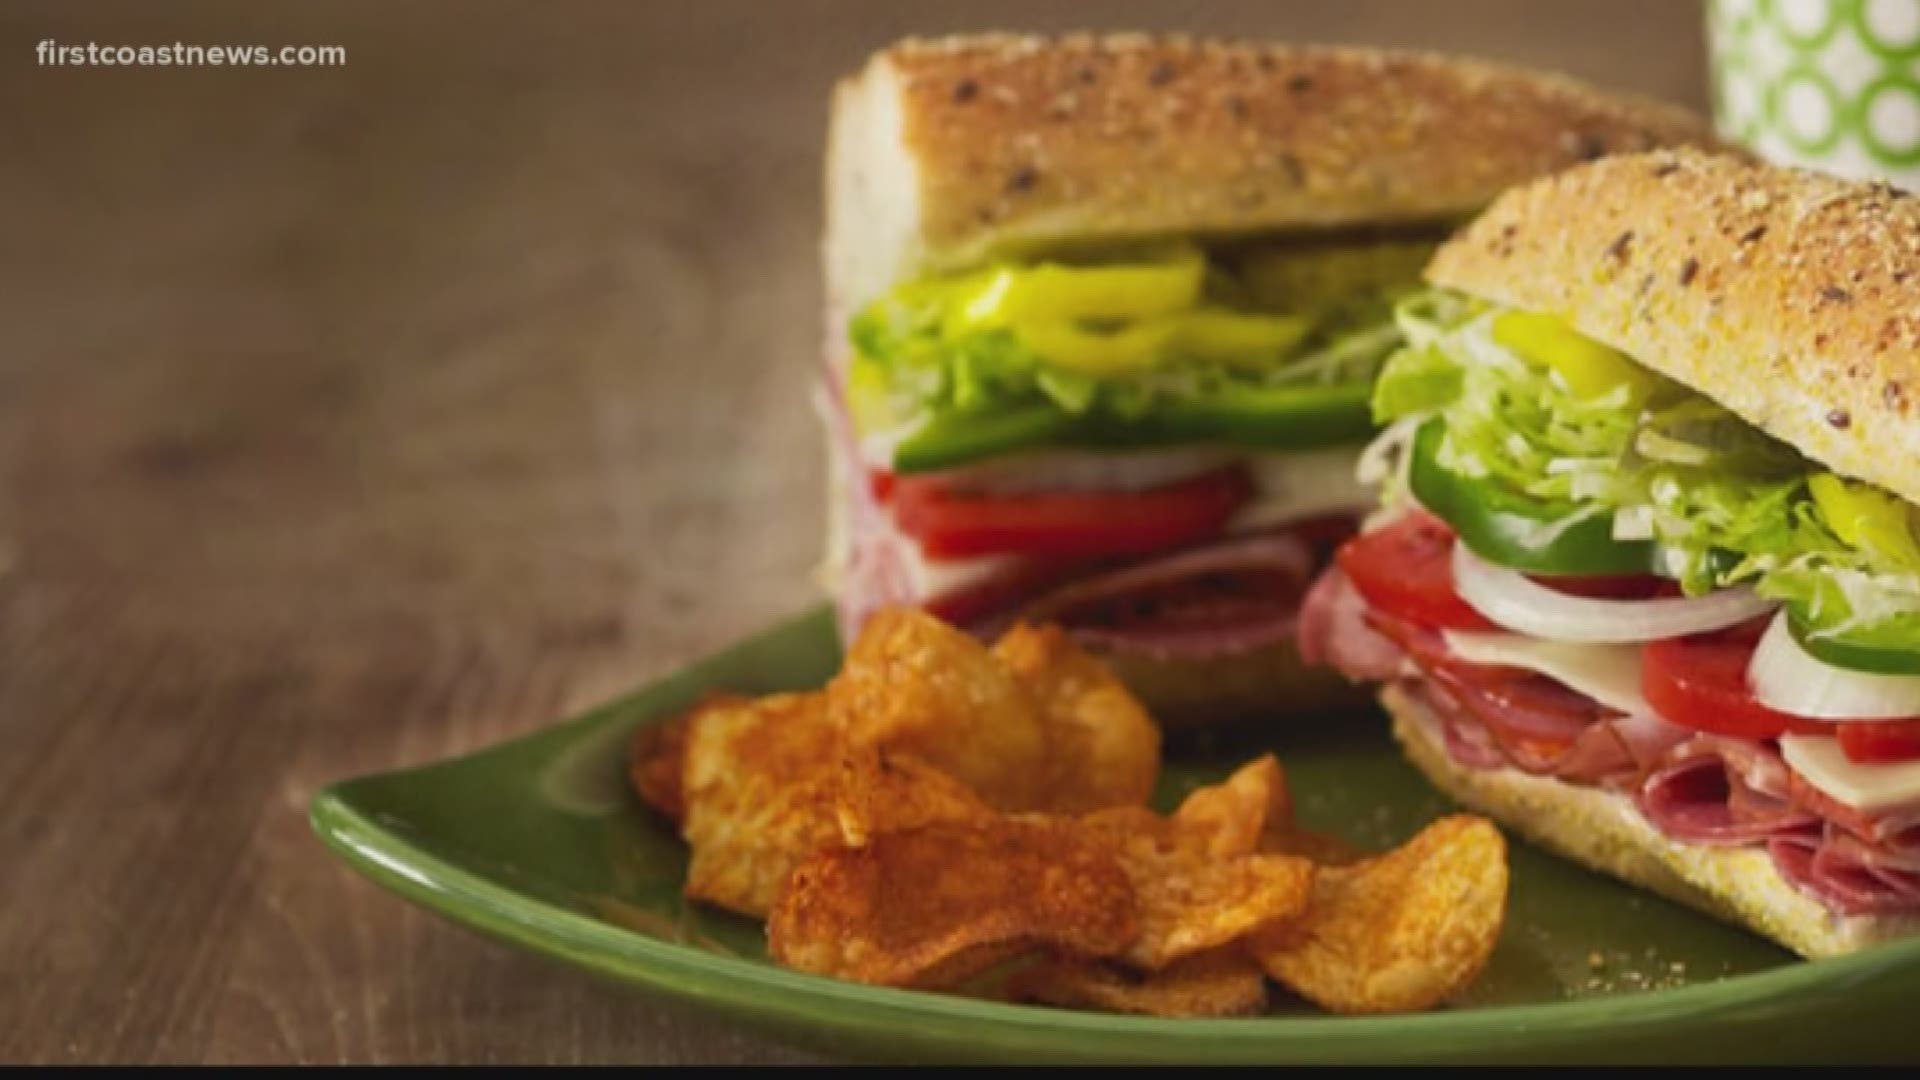 Customers can get any whole Publix sub for $5.99